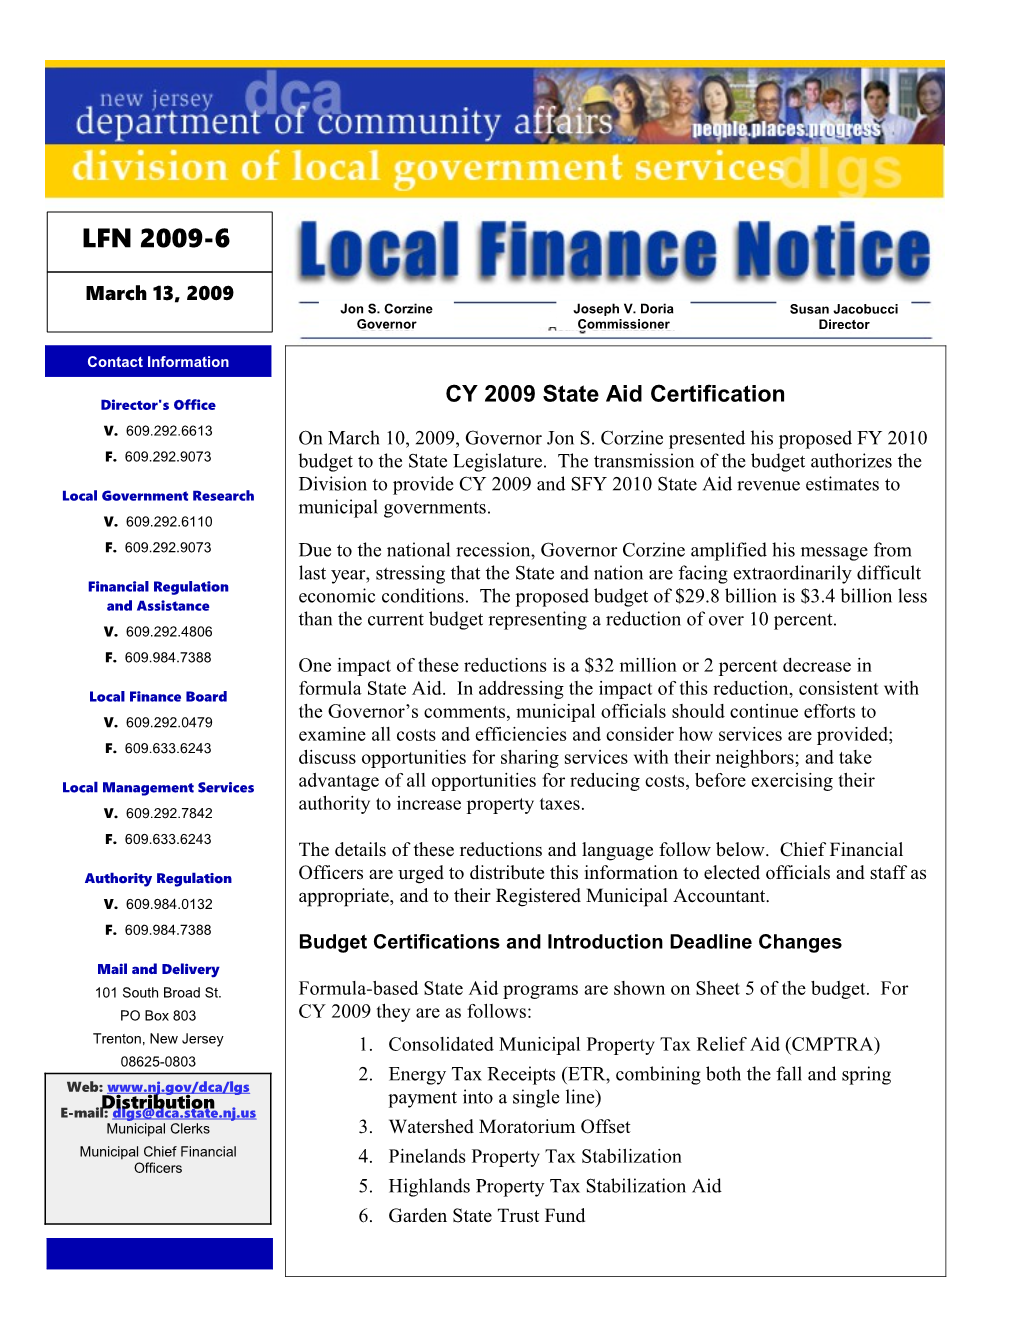 Local Finance Notice 2009-6March 13, 2009Page 1